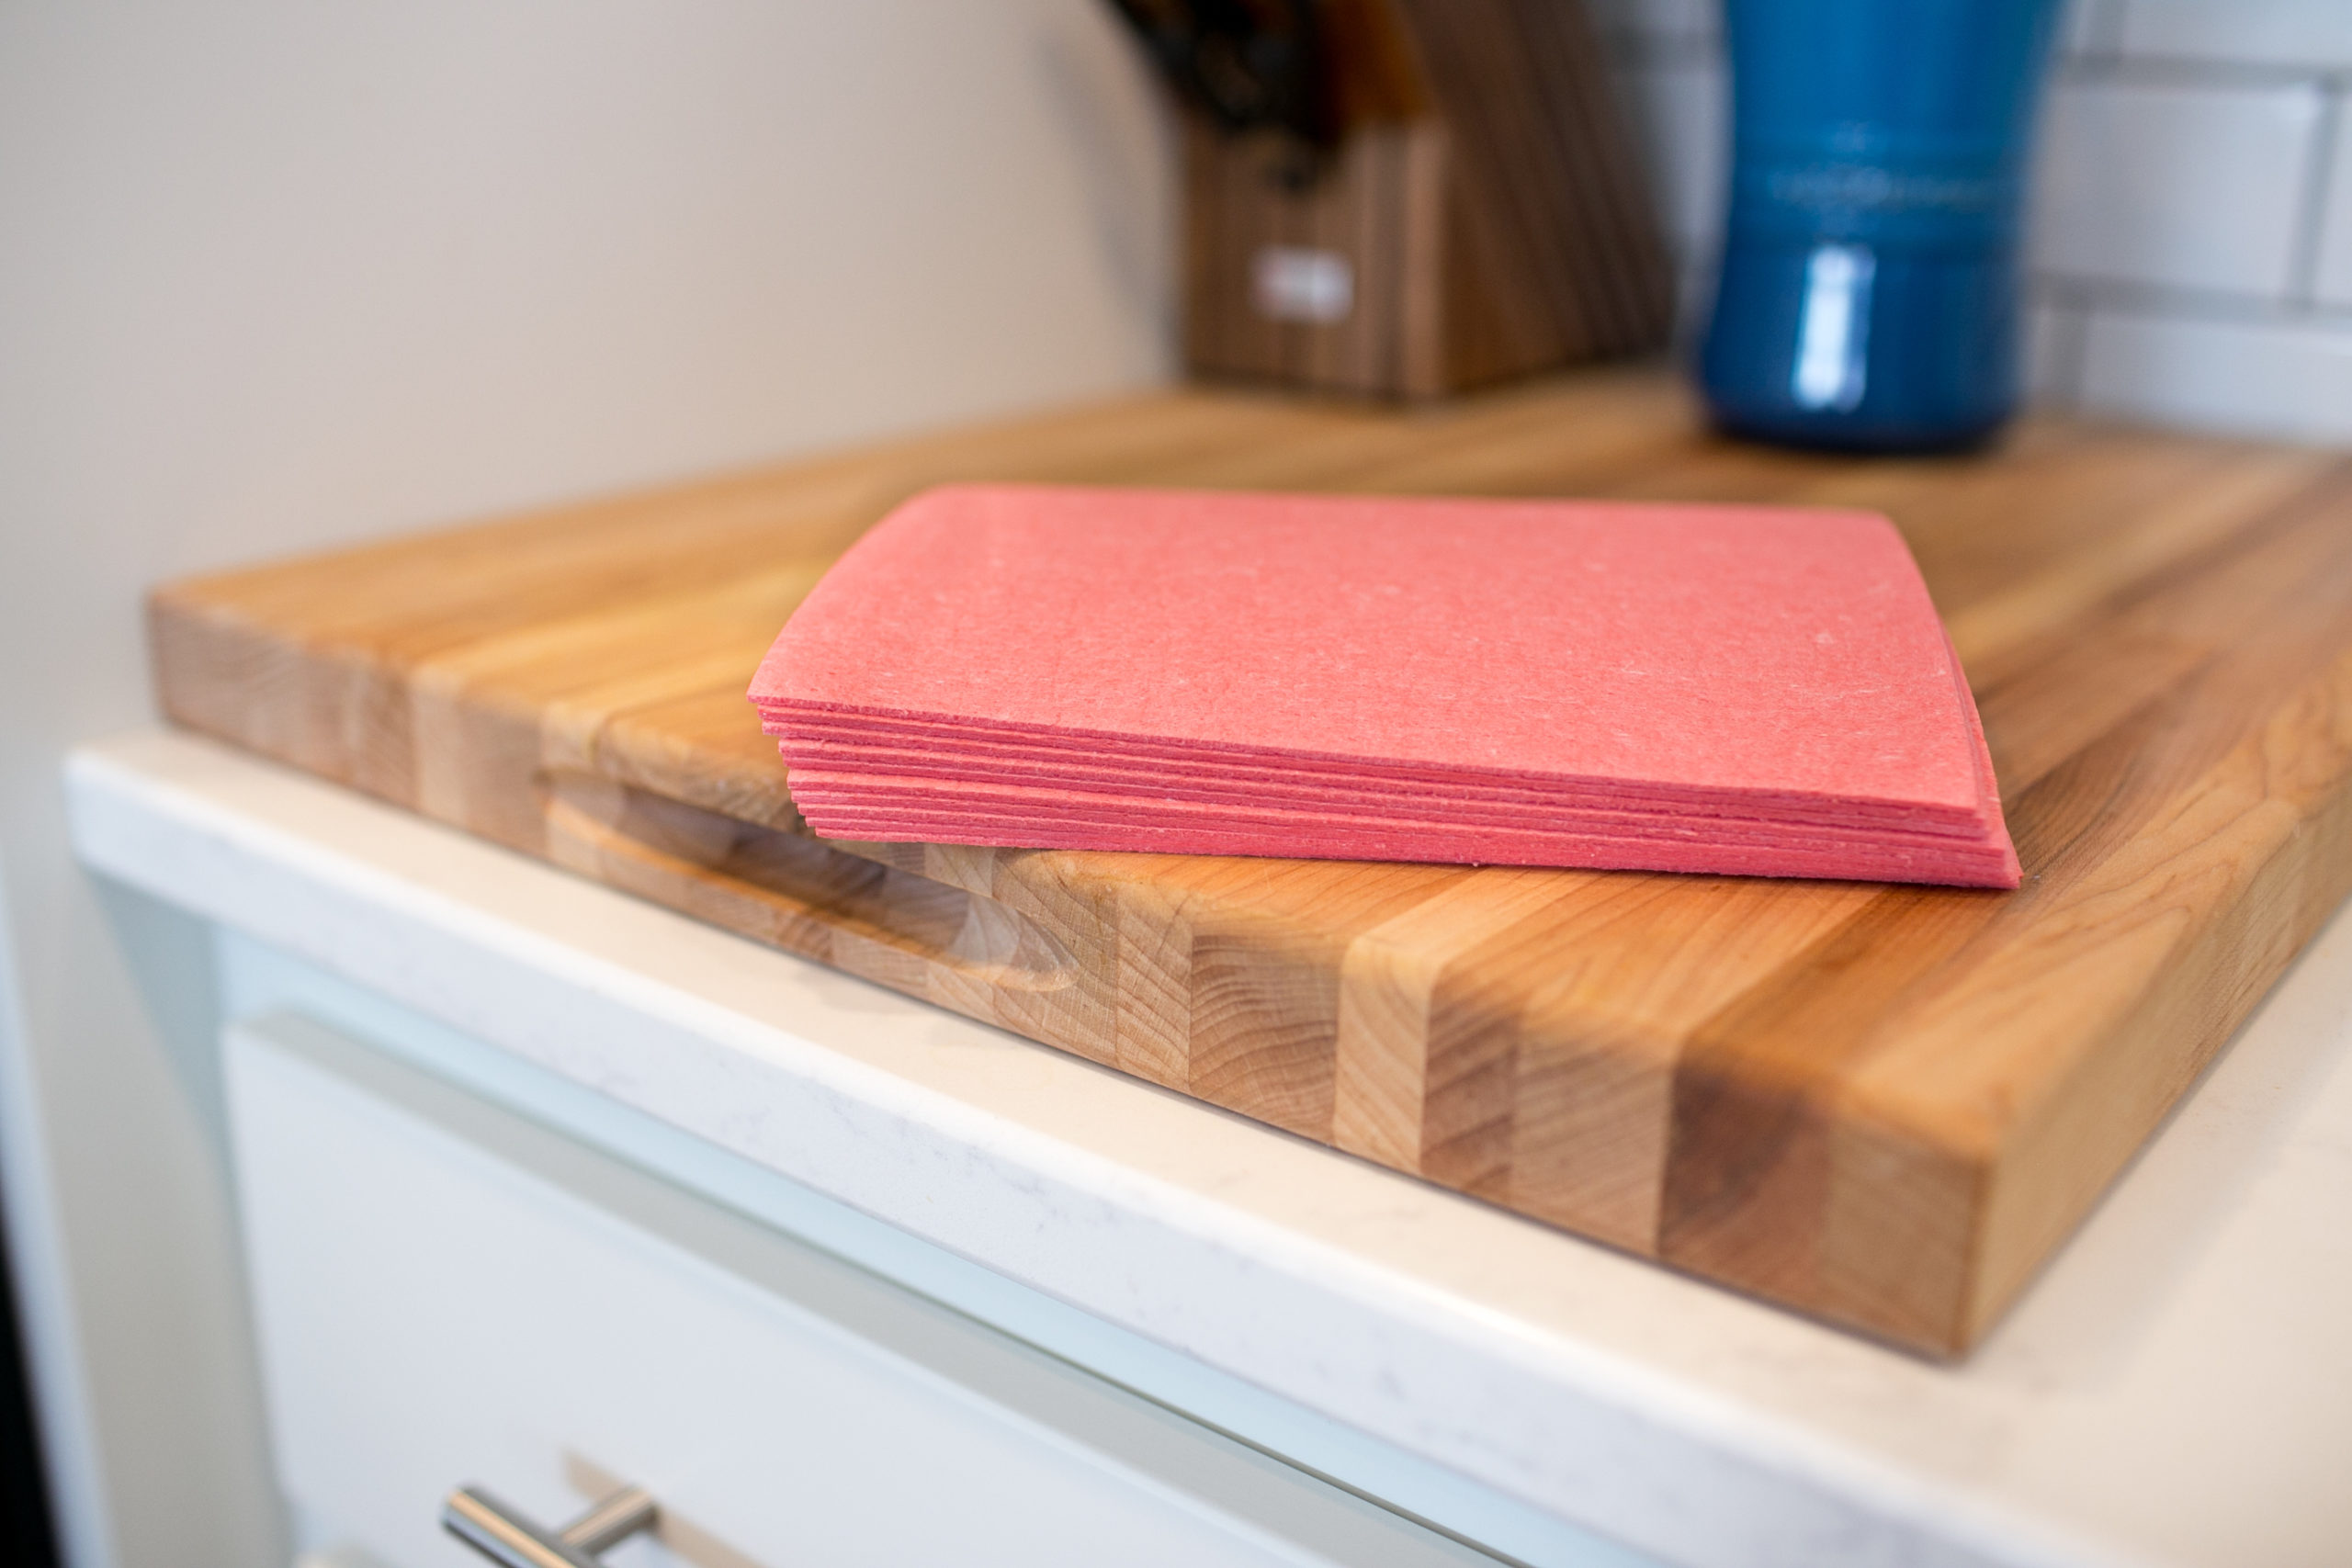 5 Ways Reusable Dish Cloths Are Better Than Paper Towels - Big